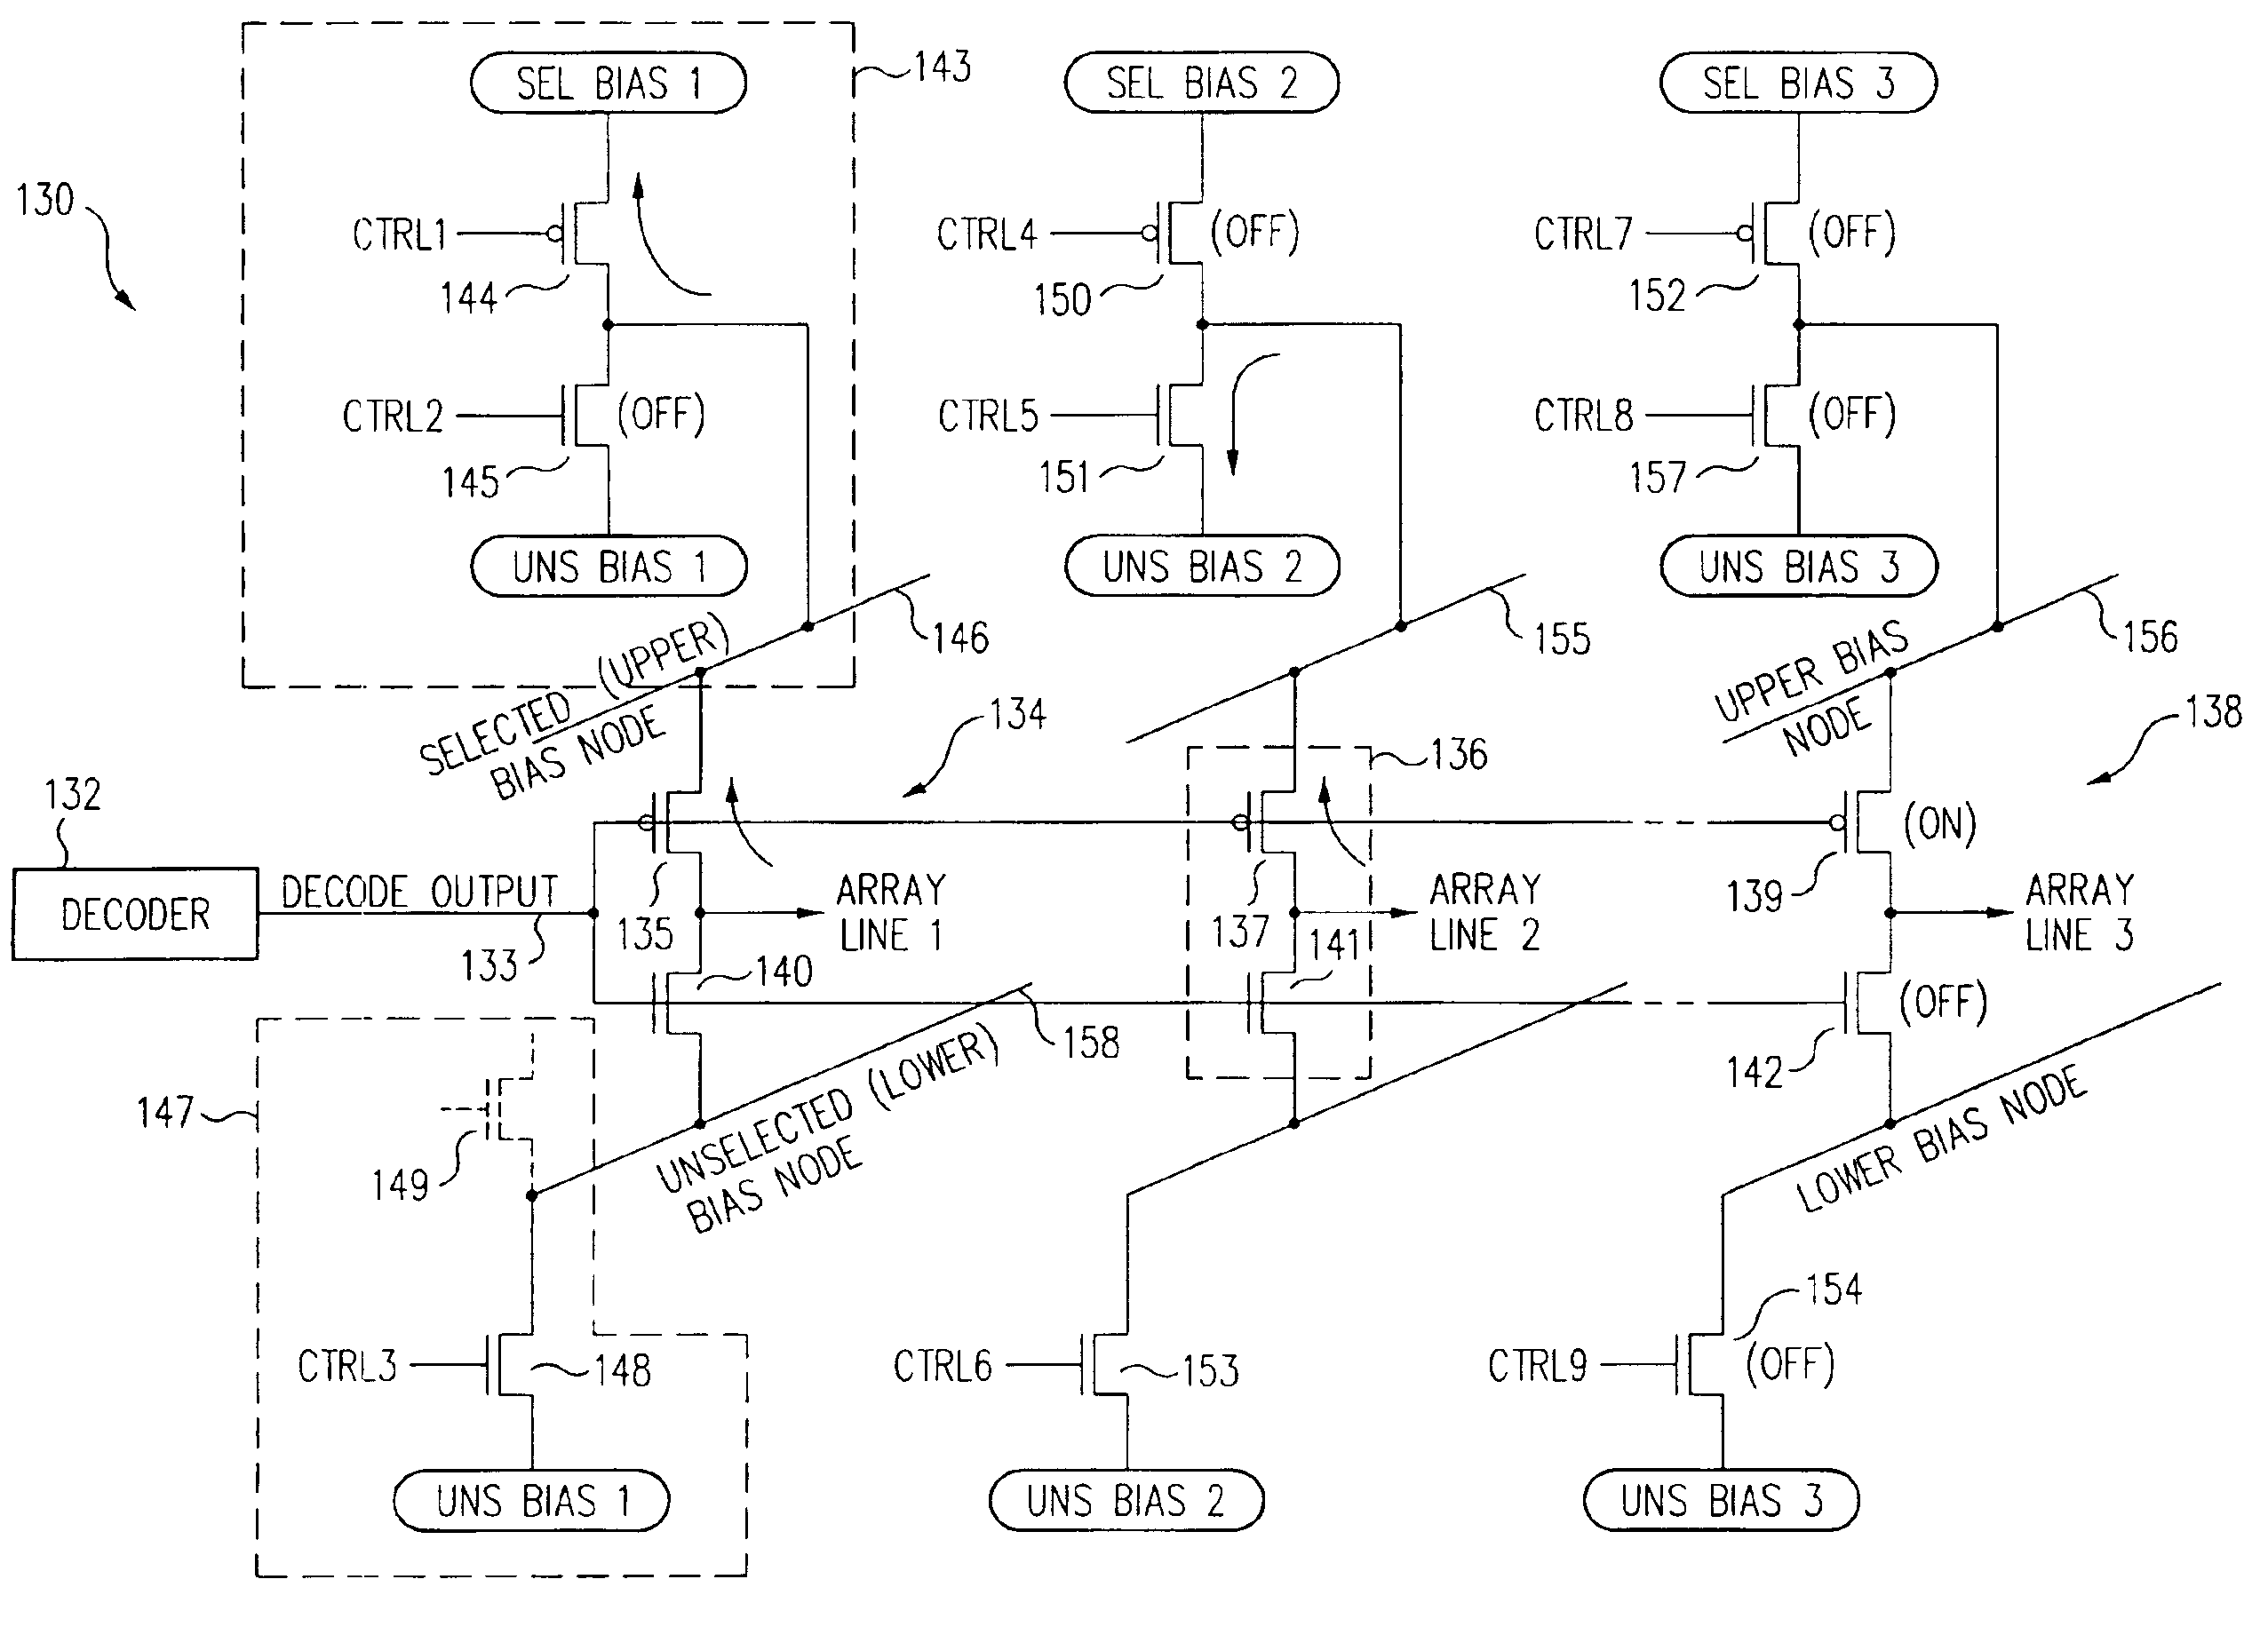 Multi-headed decoder structure utilizing memory array line driver with dual purpose driver device